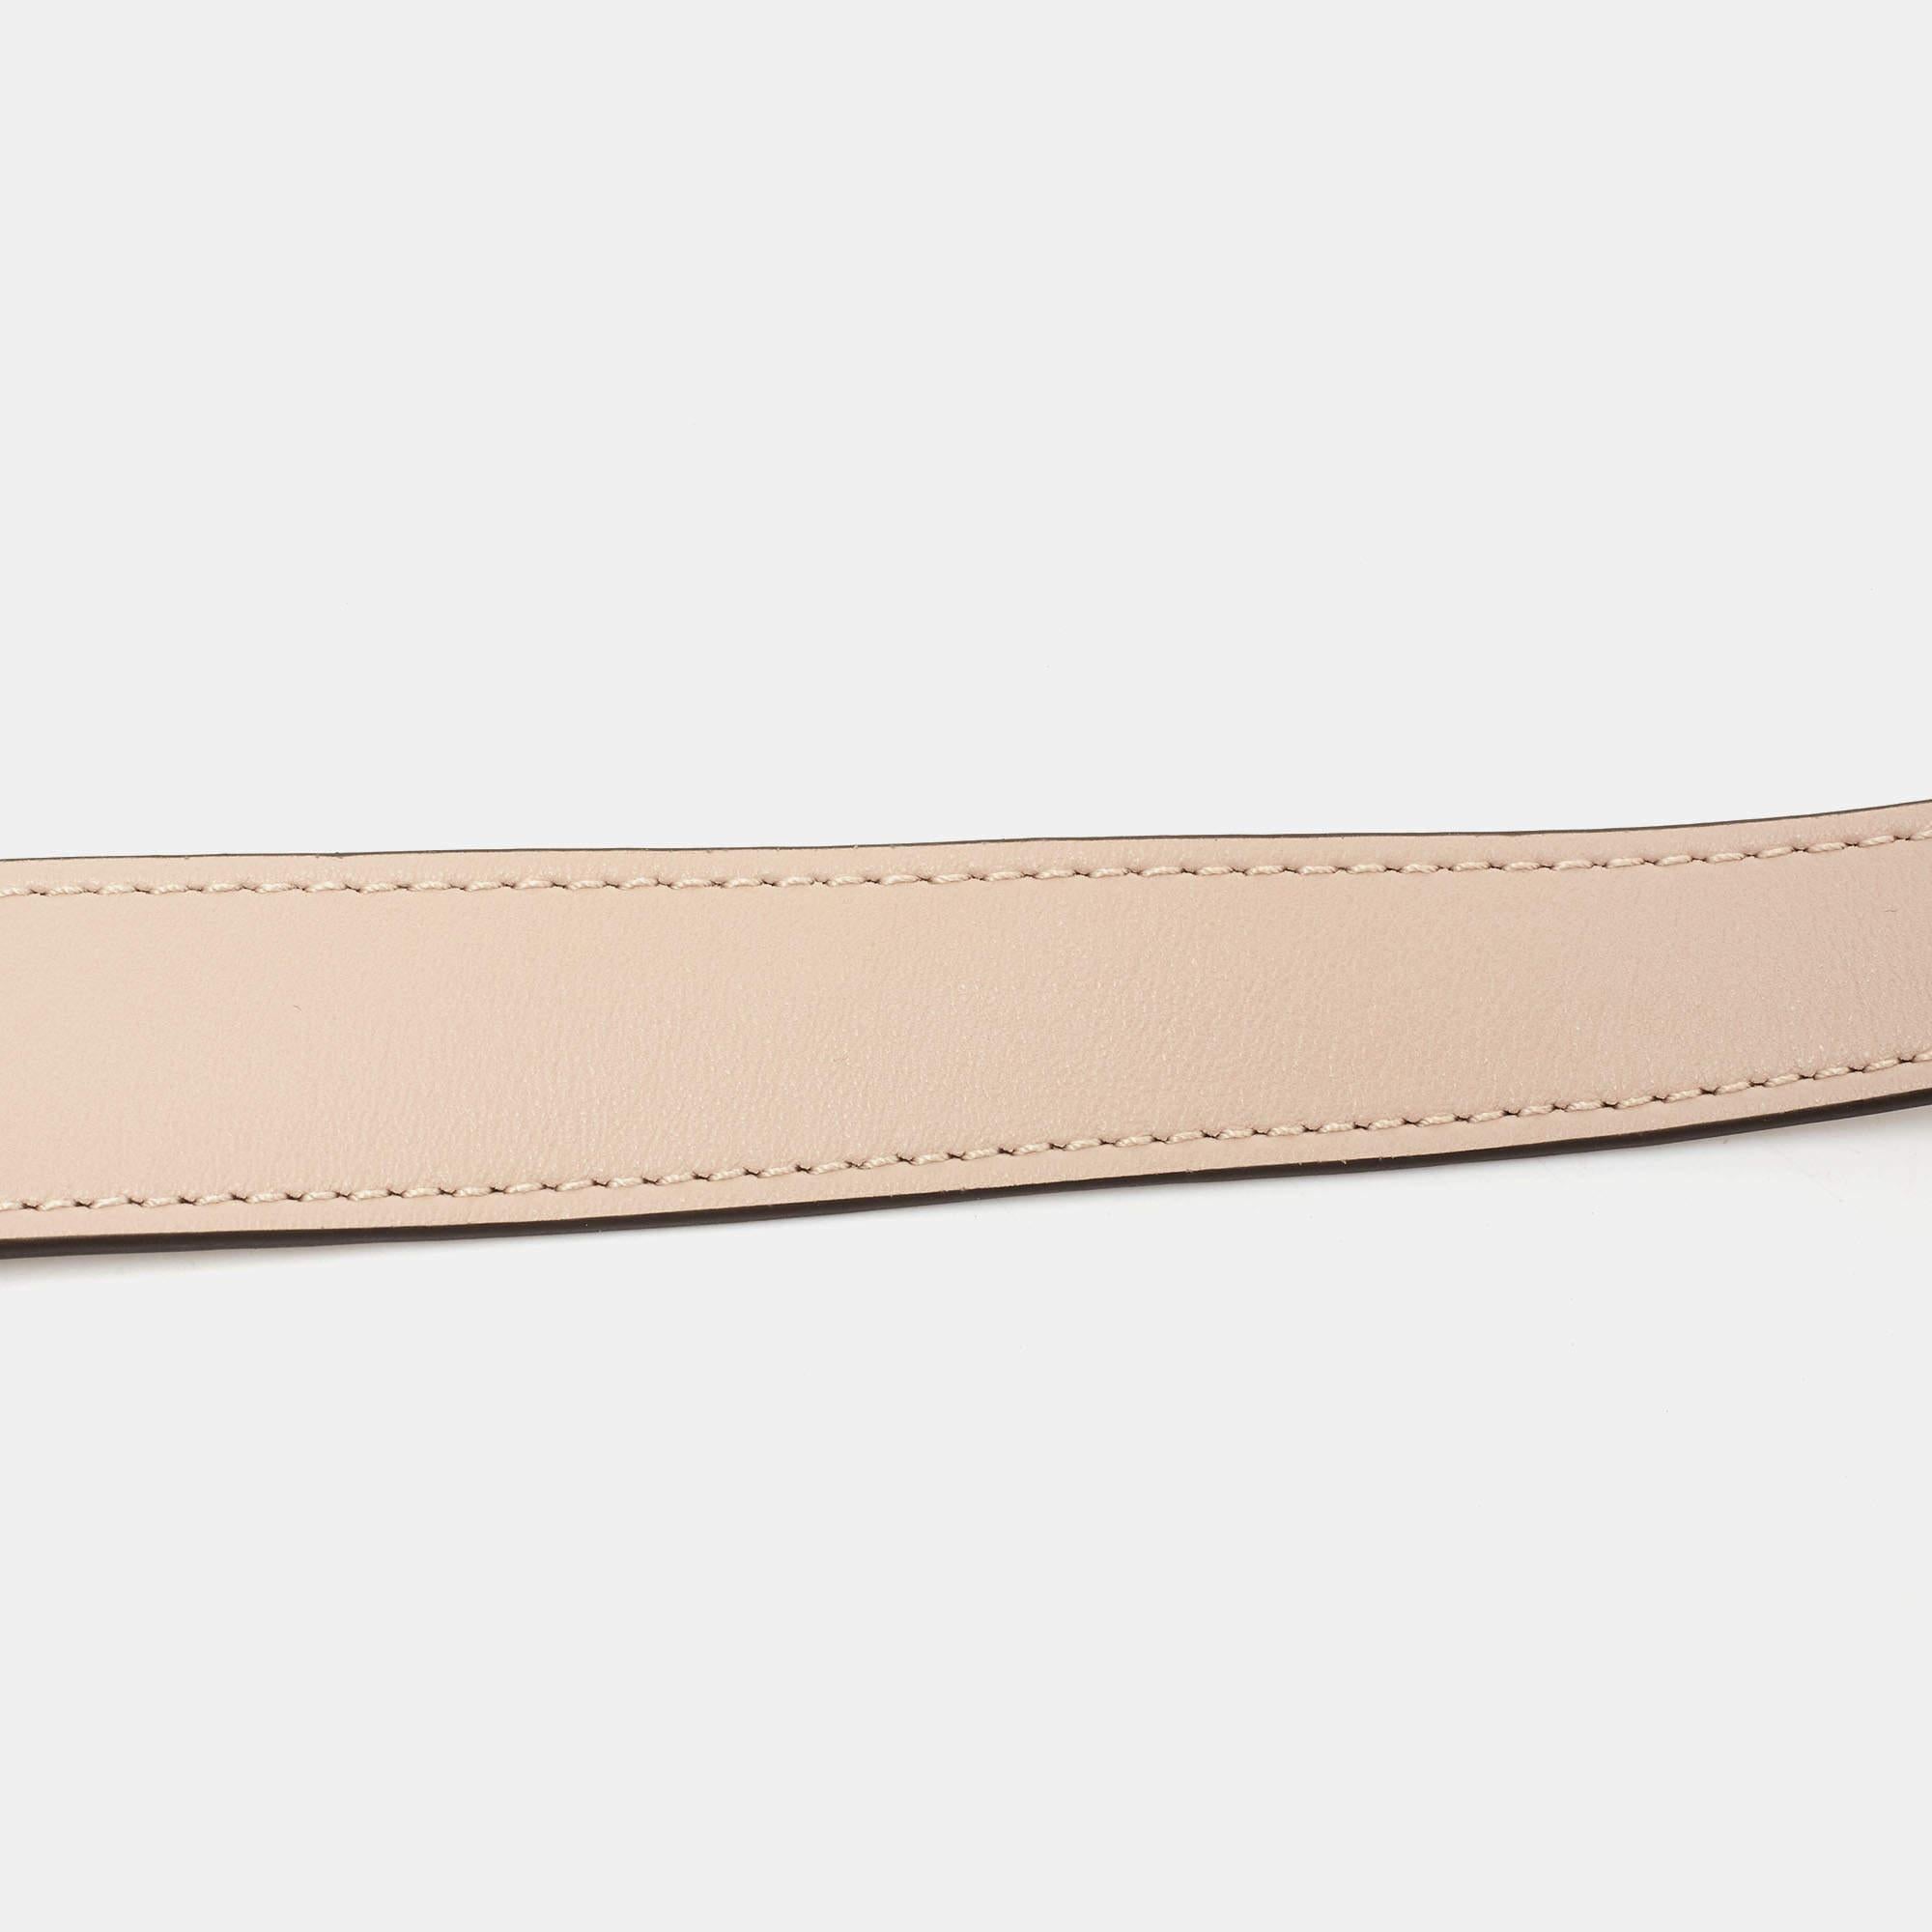 Louis Vuitton's shoulder strap is one of the most useful accessories with a touch of luxury. The strap is made from leather and is complete with two gold-tone clasps for you to attach it to your bags.

